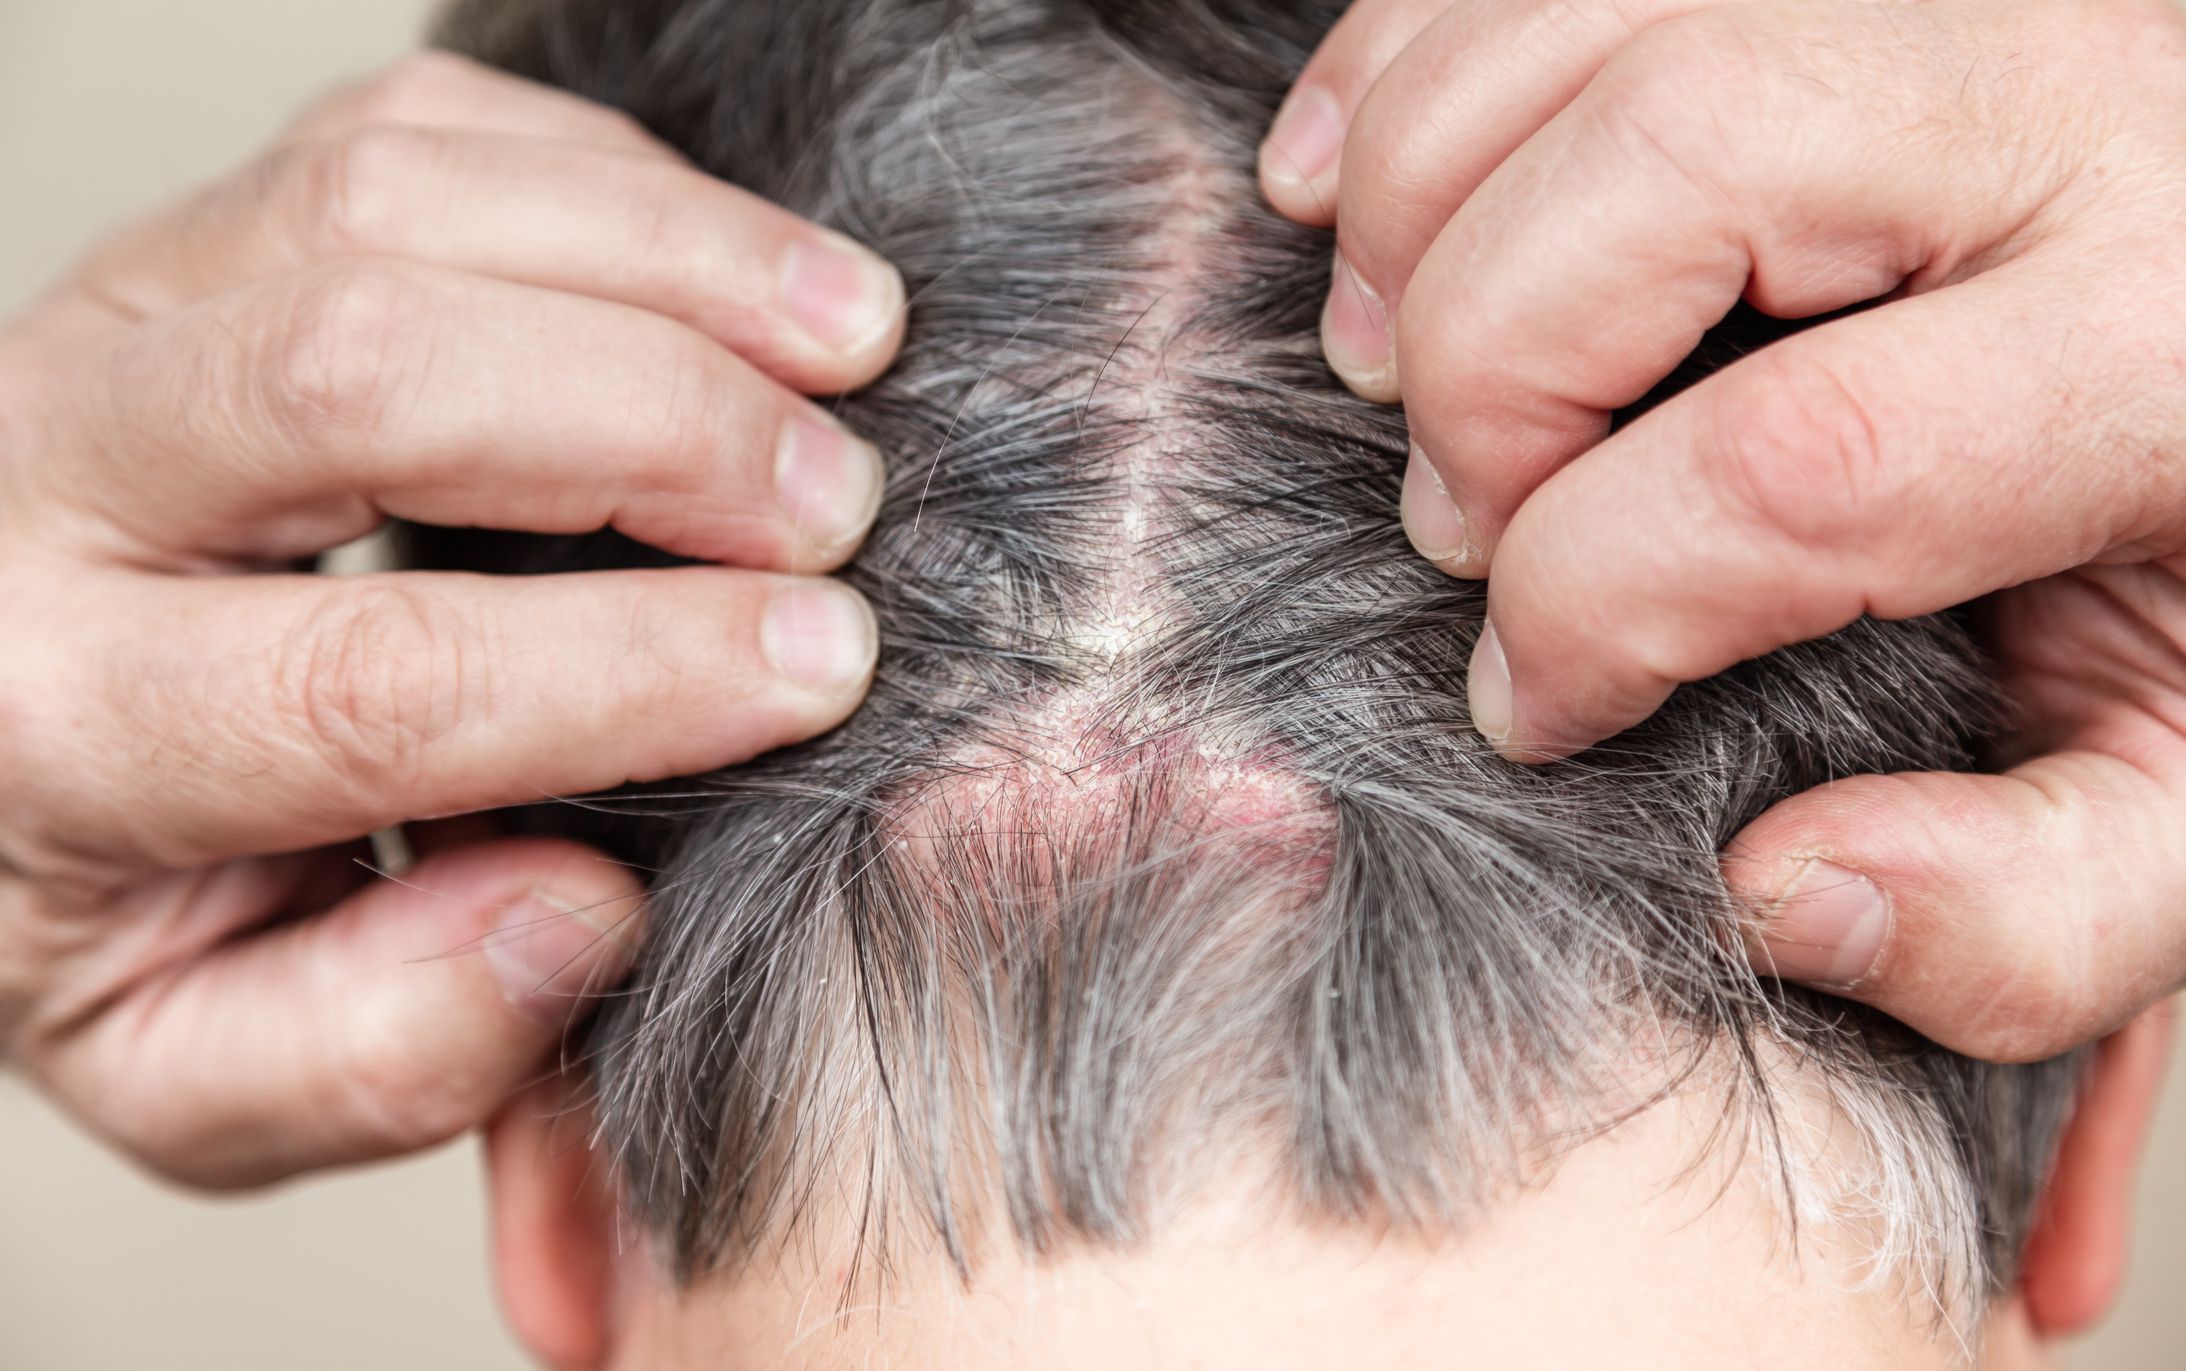 Scabs on Scalp: Causes, Diagnosis, and Treatment